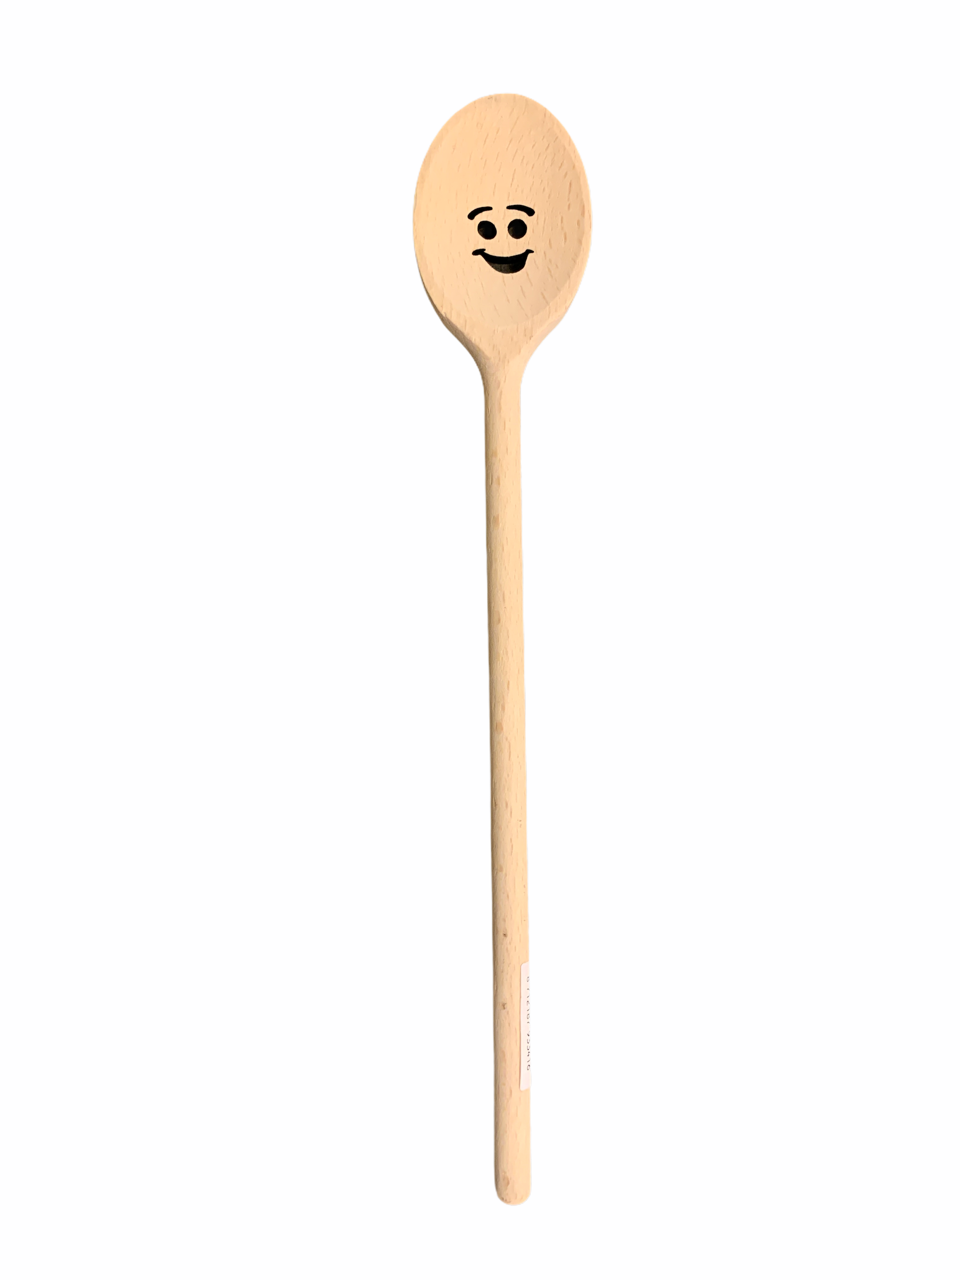 Lepel Hout Ovaal 30cm Smiley